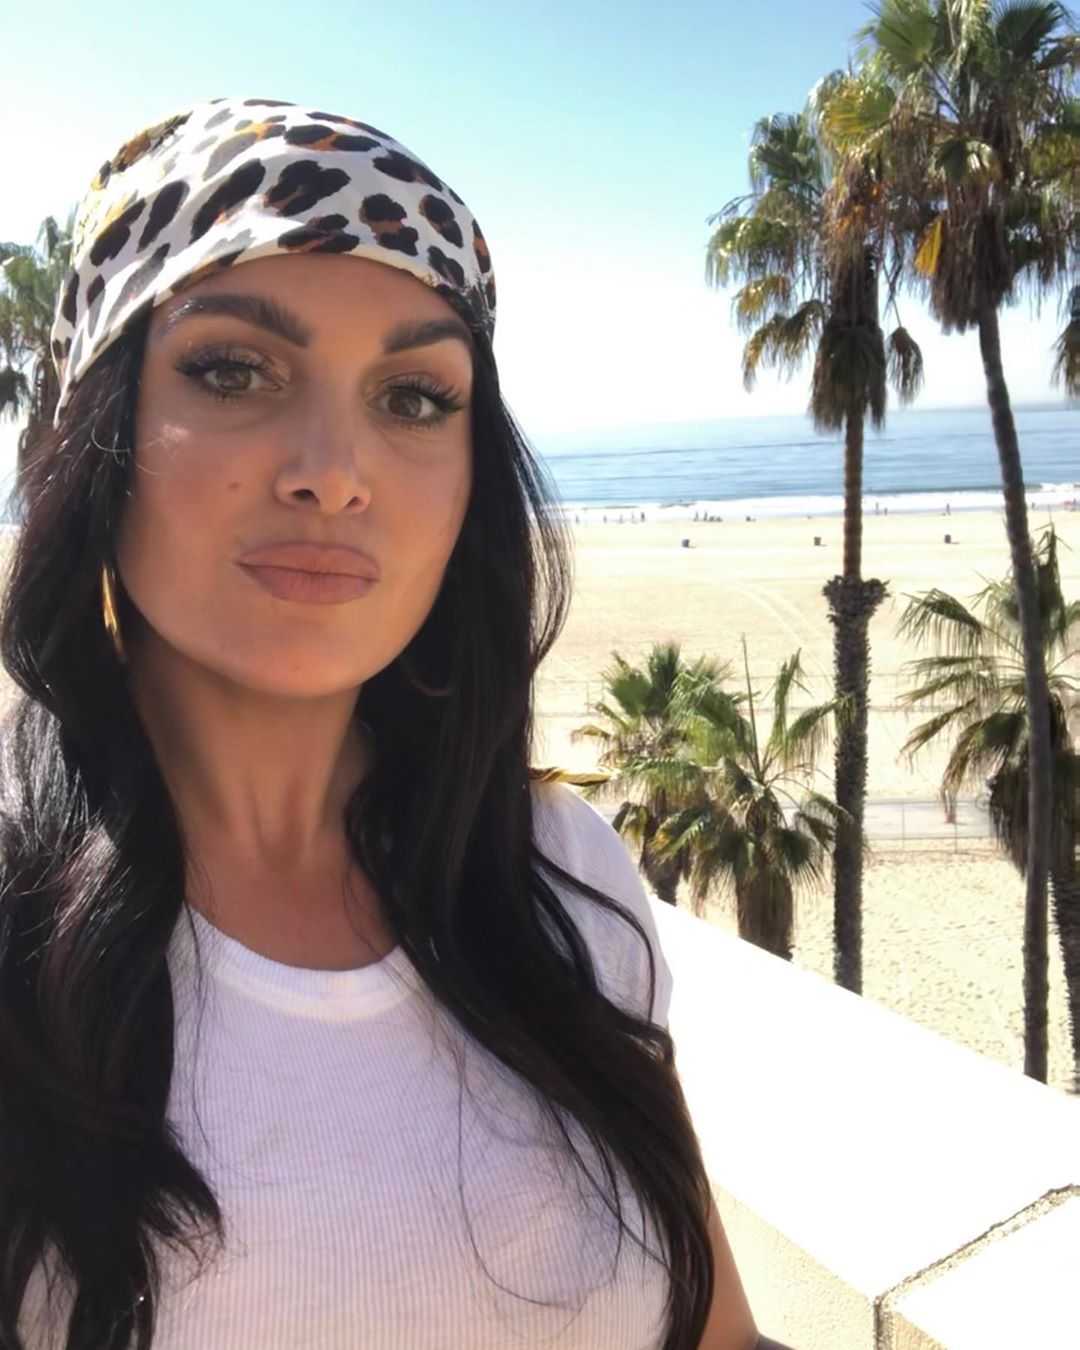 70+ Hot Pictures Of Molly Qerim Are So Damn Sexy That We Don’t Deserve Her 396